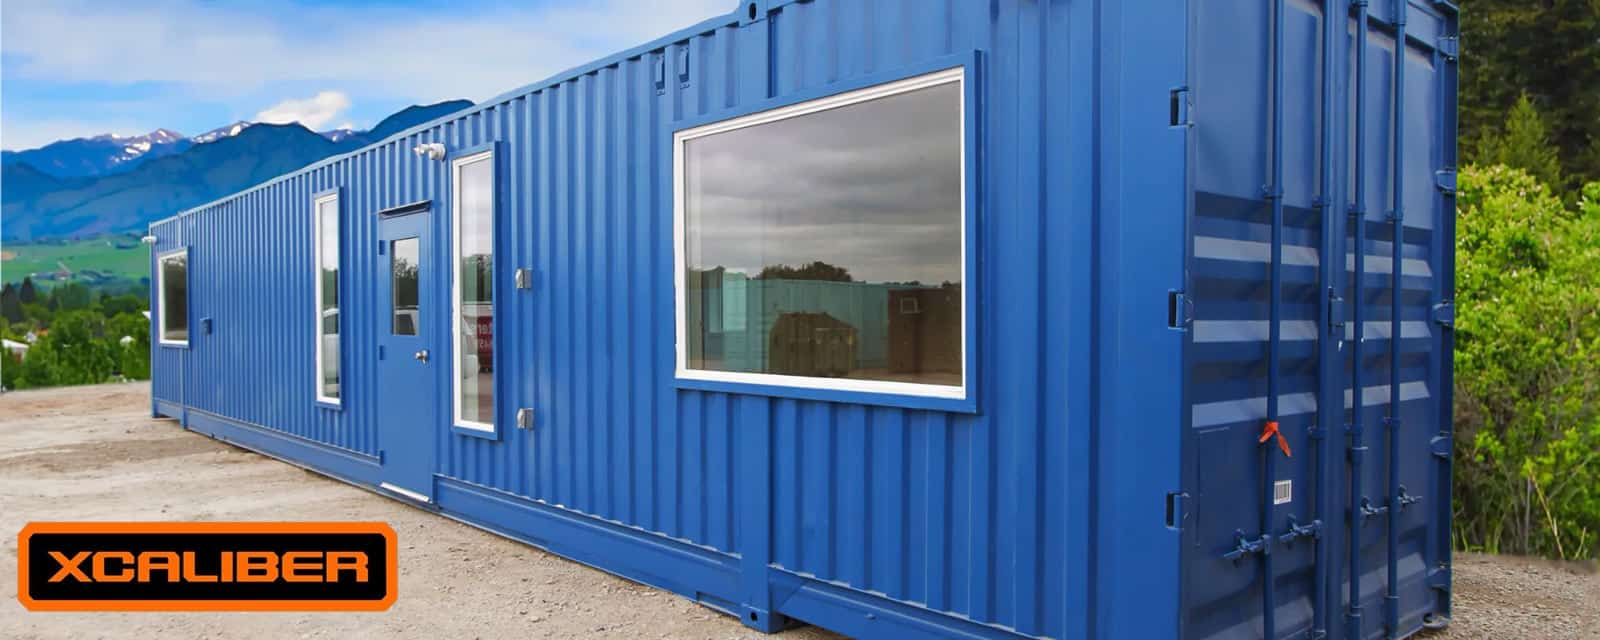 Xcaliber Container Cabins